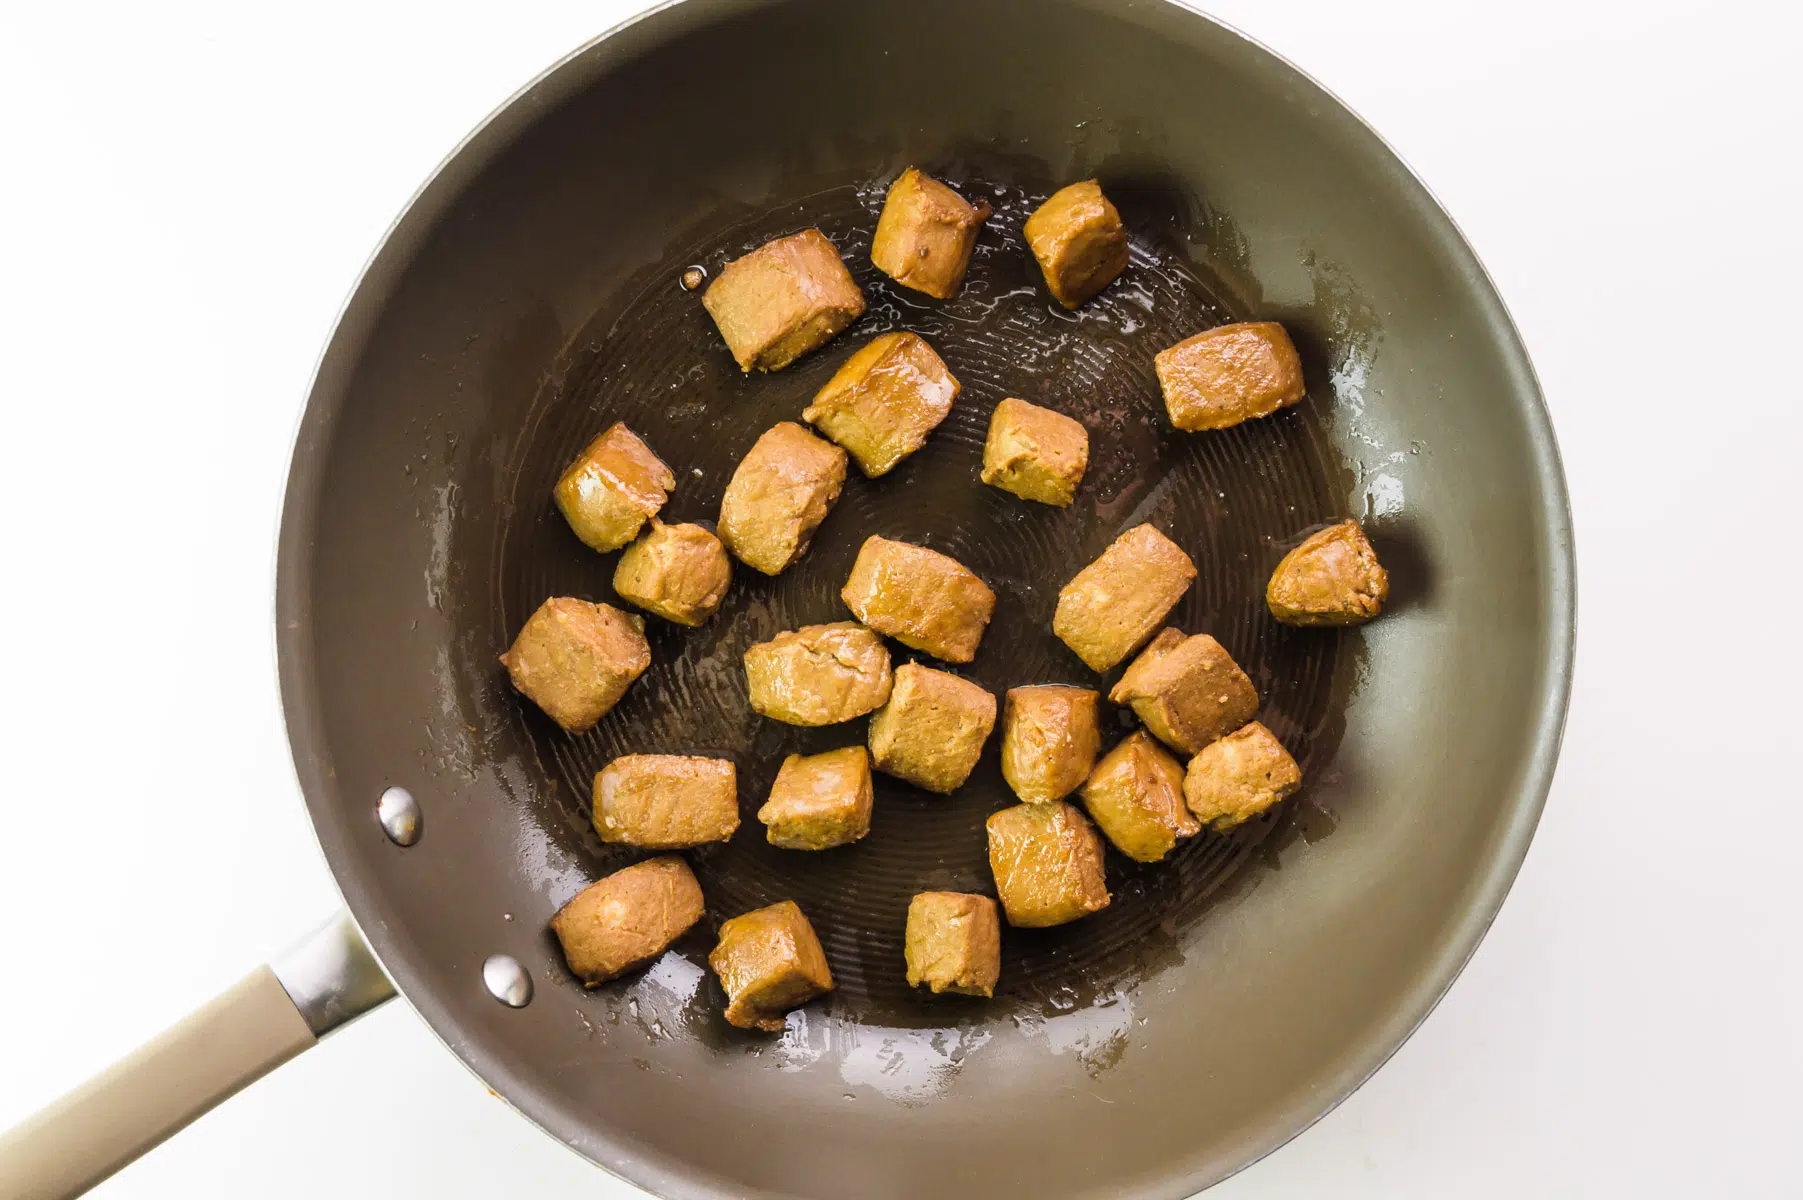 Vegan beef tips are being cooked in a skillet.